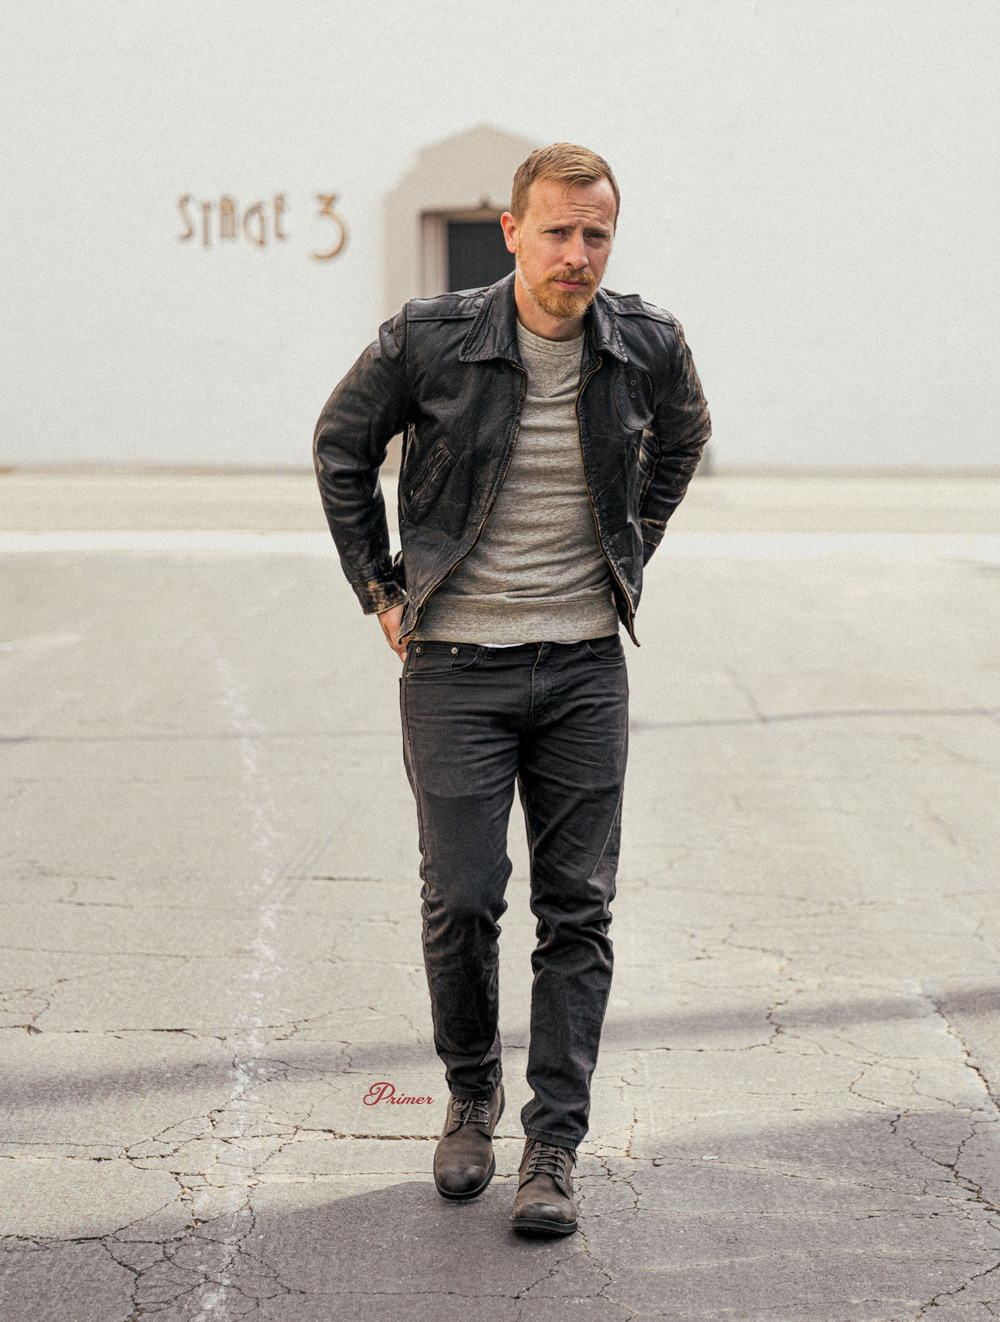 Andrew Snavely wearing black leather jacket, gray sweatshirt, charcoal jeans, gray boots monochrome outfit inspiration